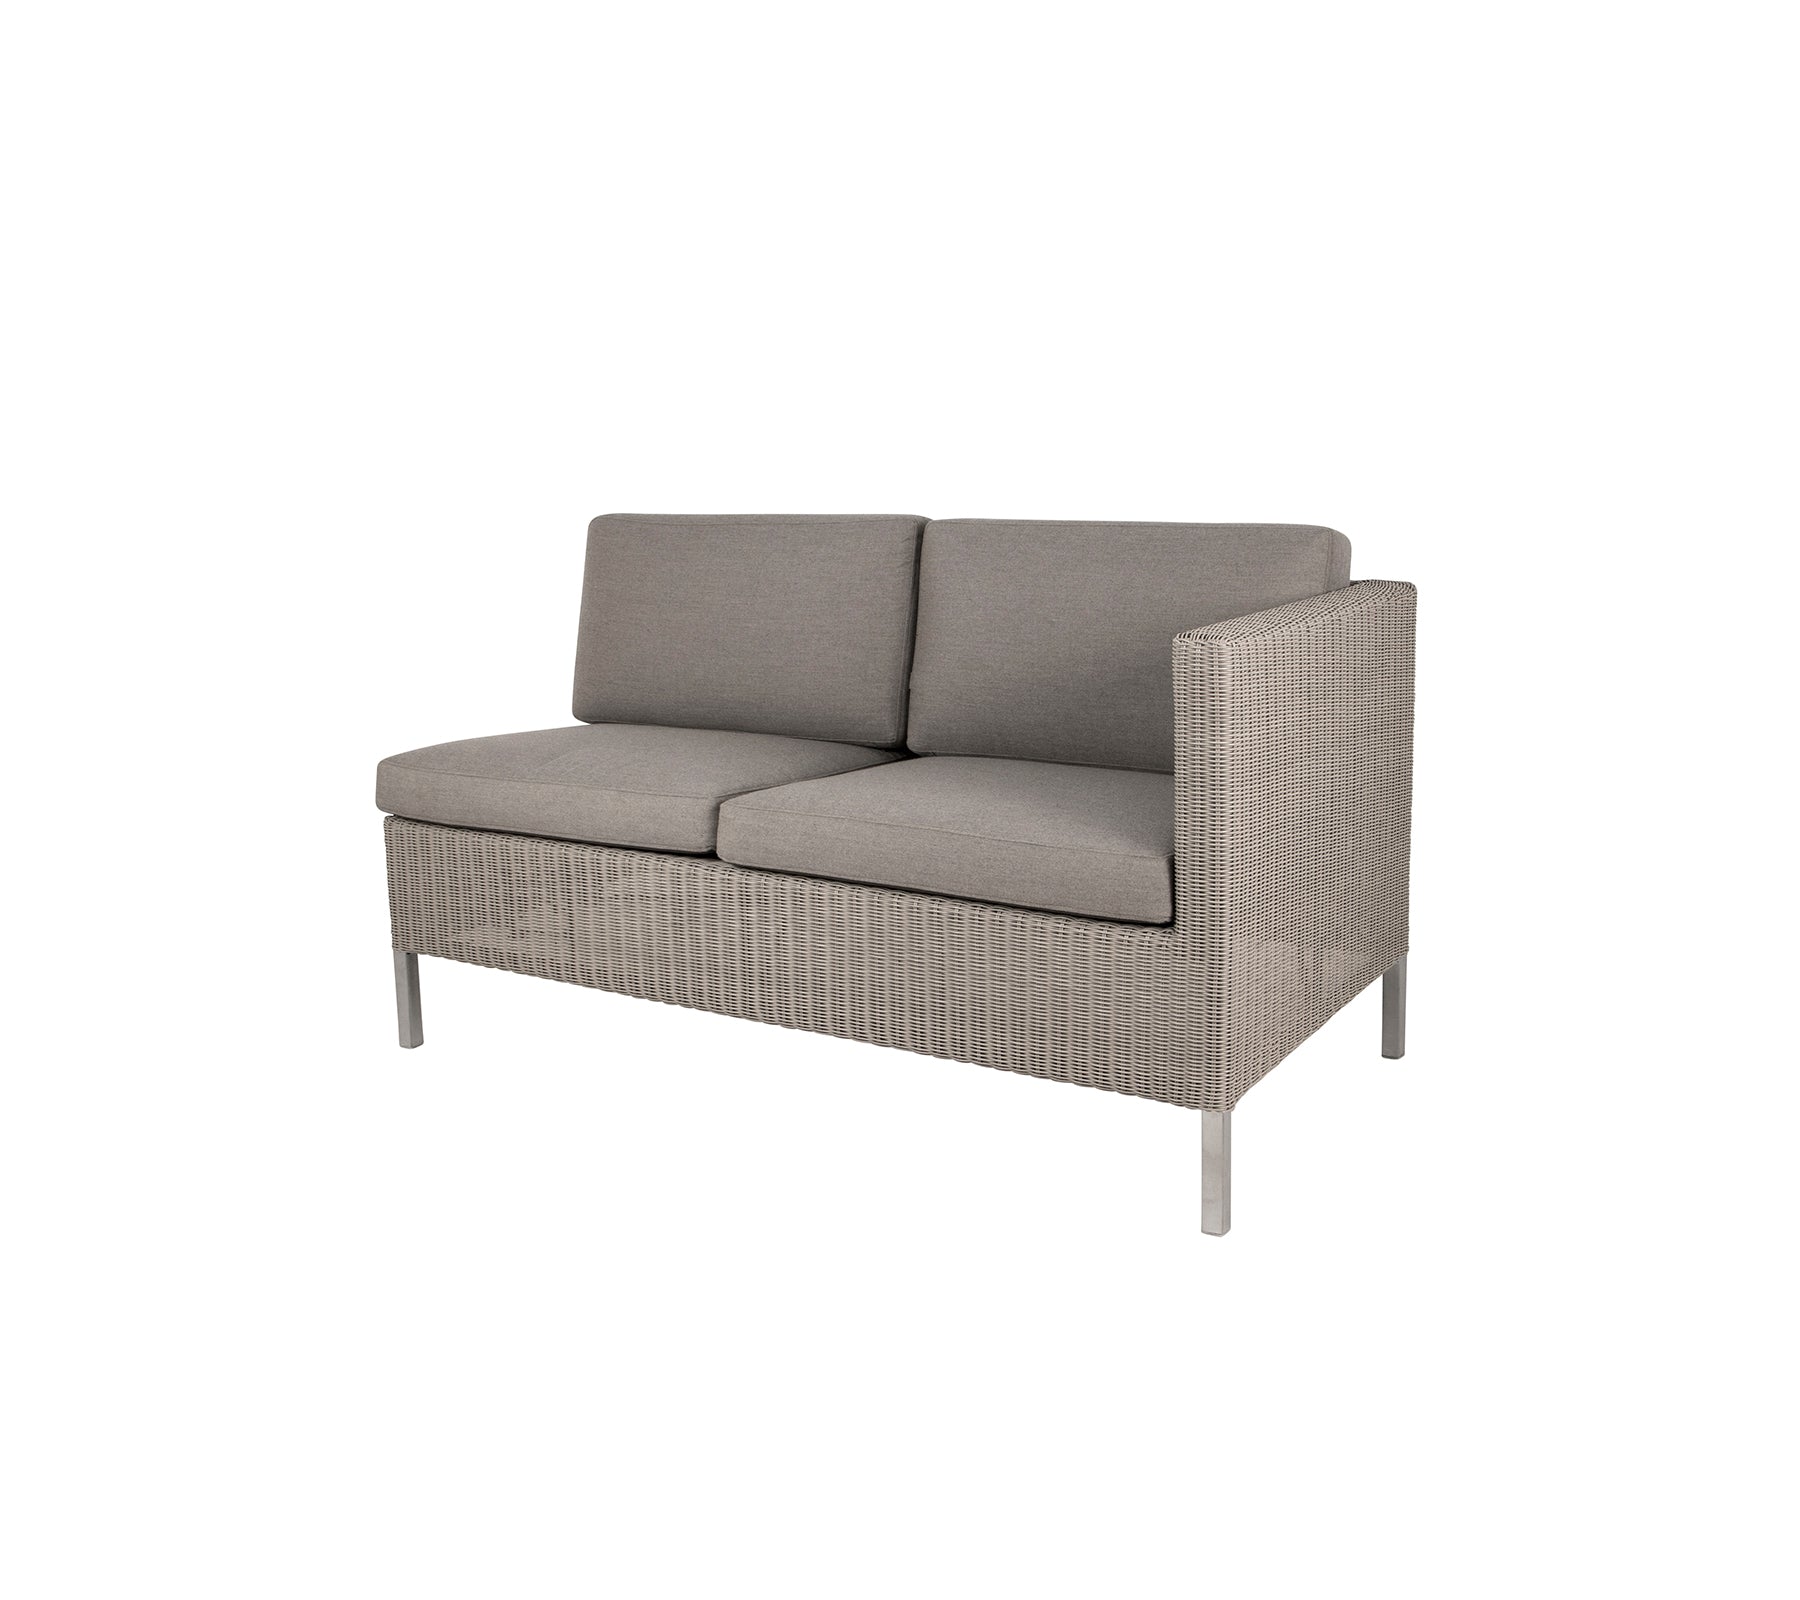 Cane-line Connect Dining Lounge 2-seater Sofa Left Module 55193T